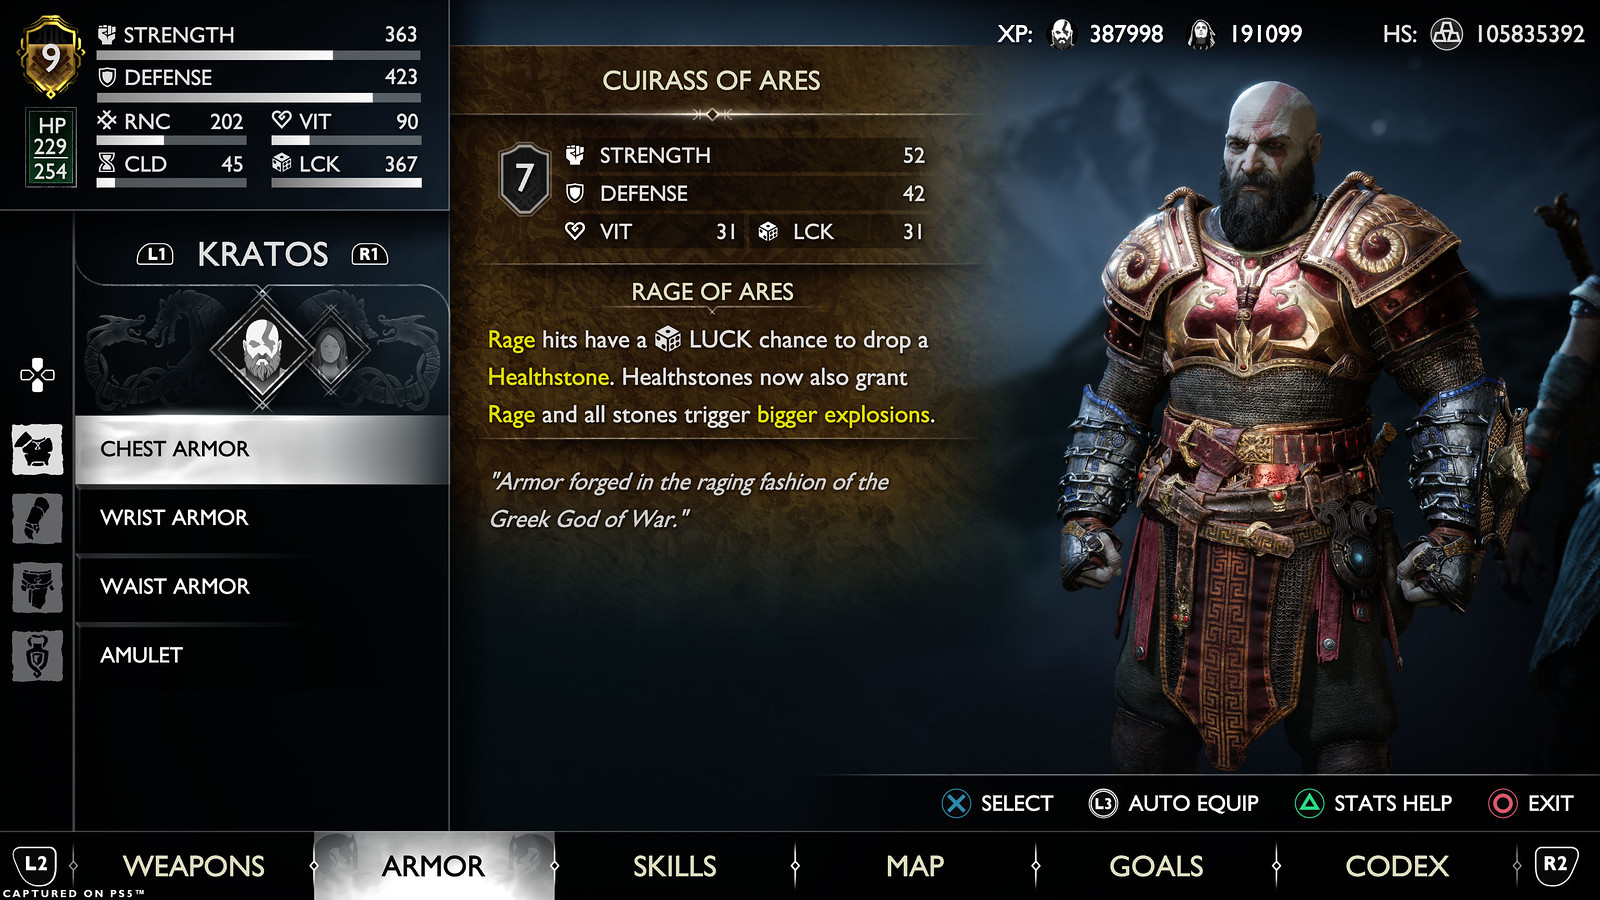 Image shows the in-game Armor menu with the recommended pieces from this build equipped. The selected piece is the chest armor, the Cuirass of Ares, from the new Ares Armor set exclusive to New Game Plus.  